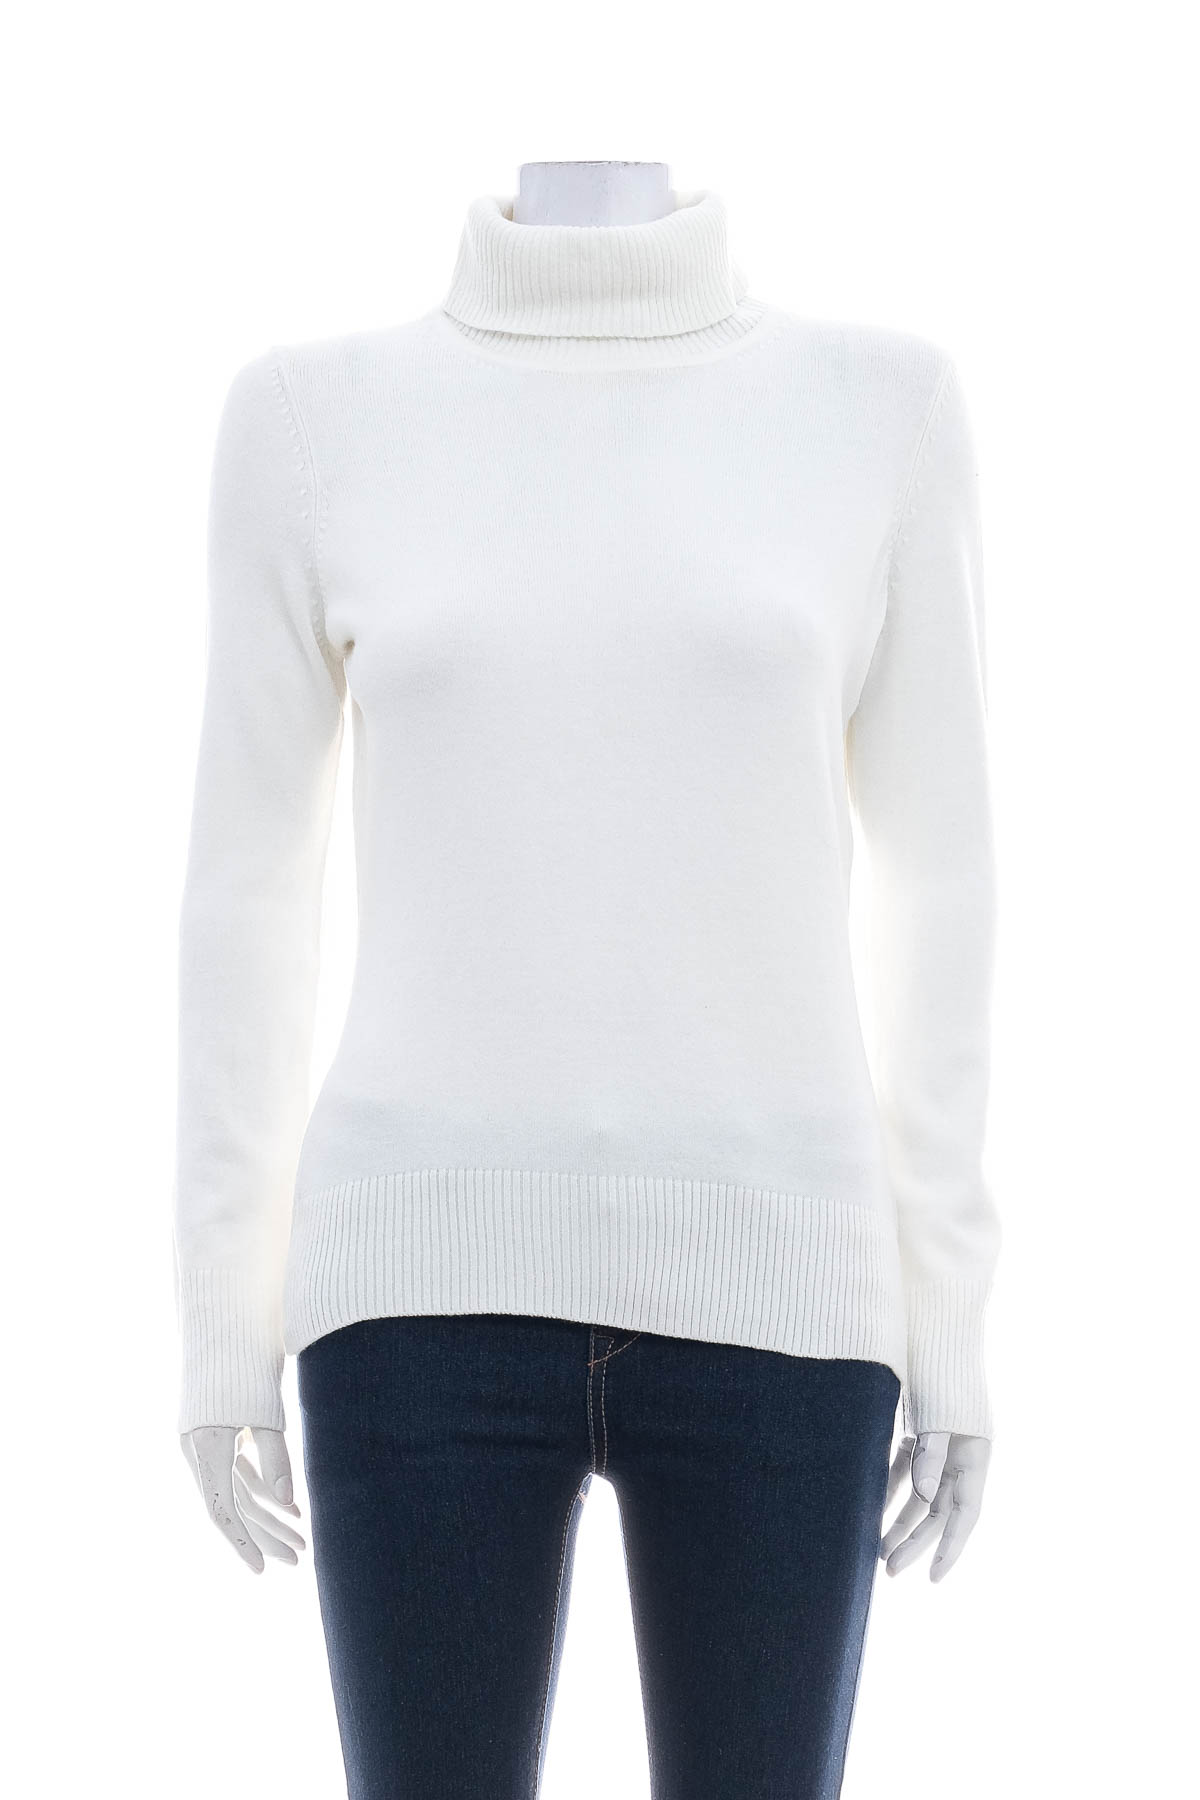 Women's sweater - French Connection - 0